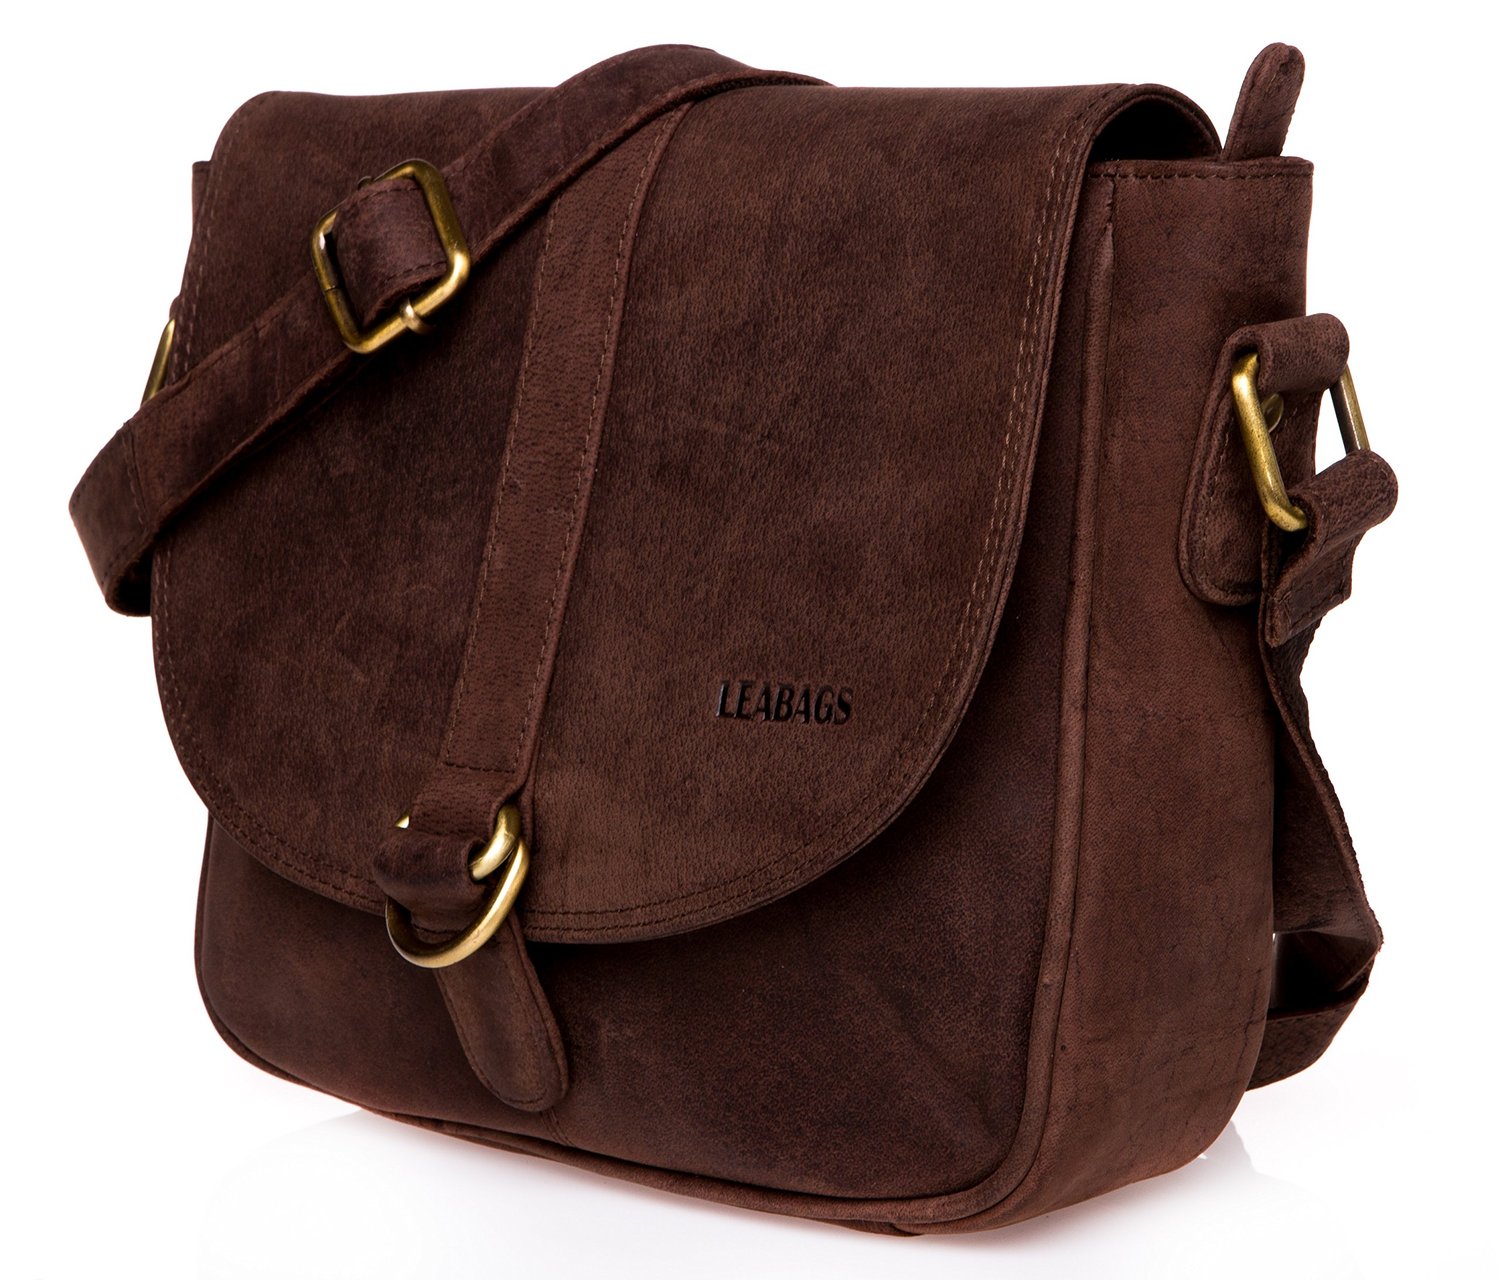 LEABAGS - \